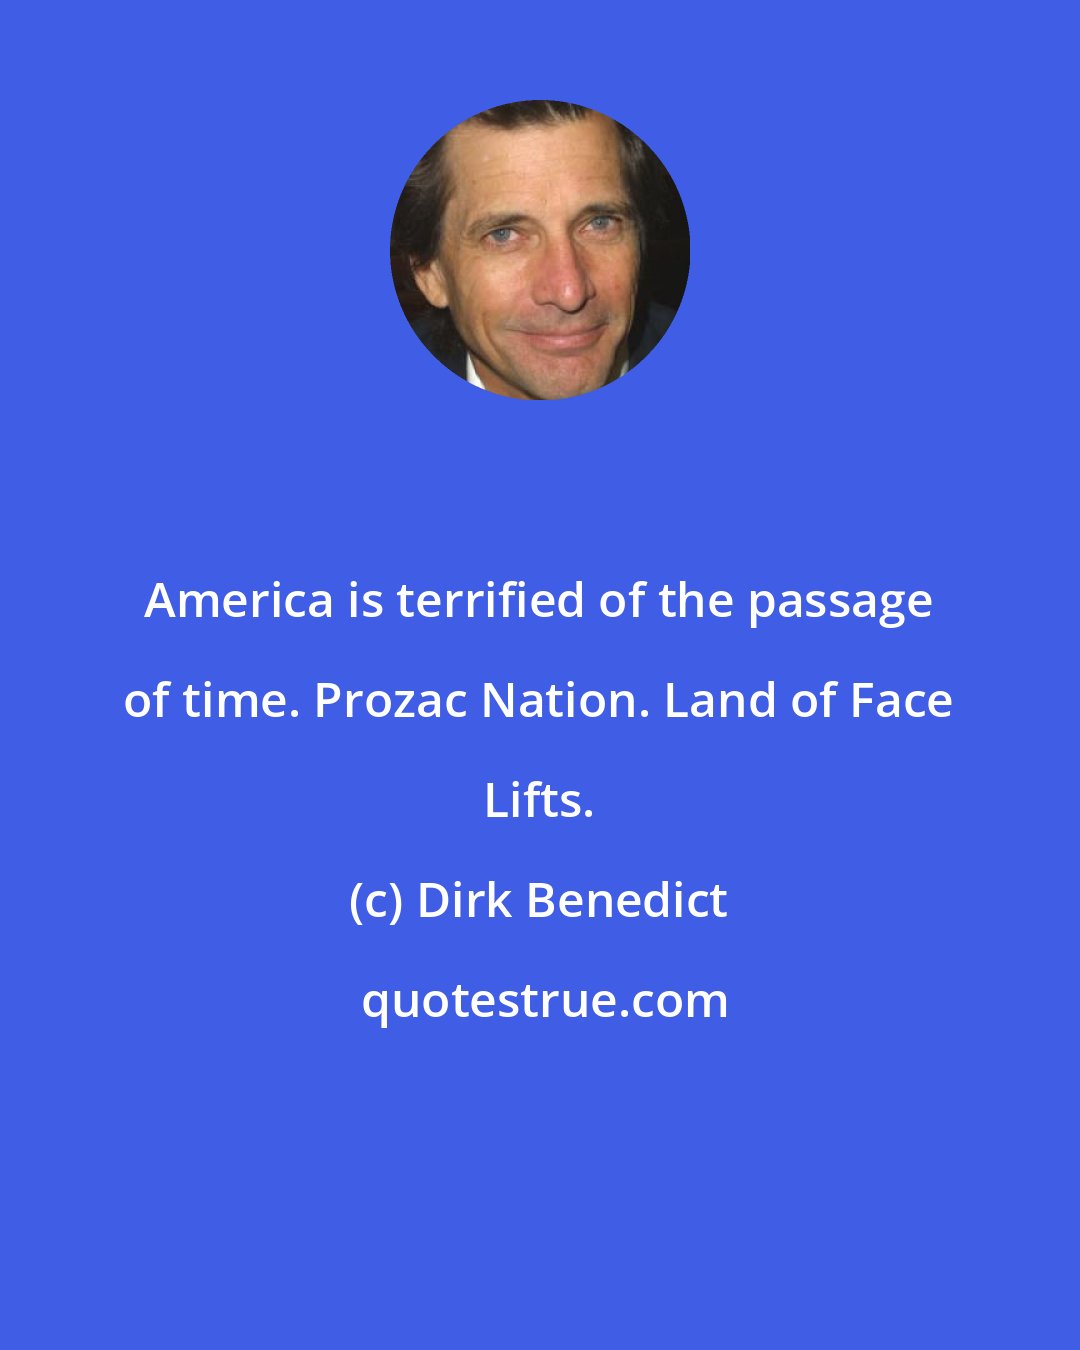 Dirk Benedict: America is terrified of the passage of time. Prozac Nation. Land of Face Lifts.